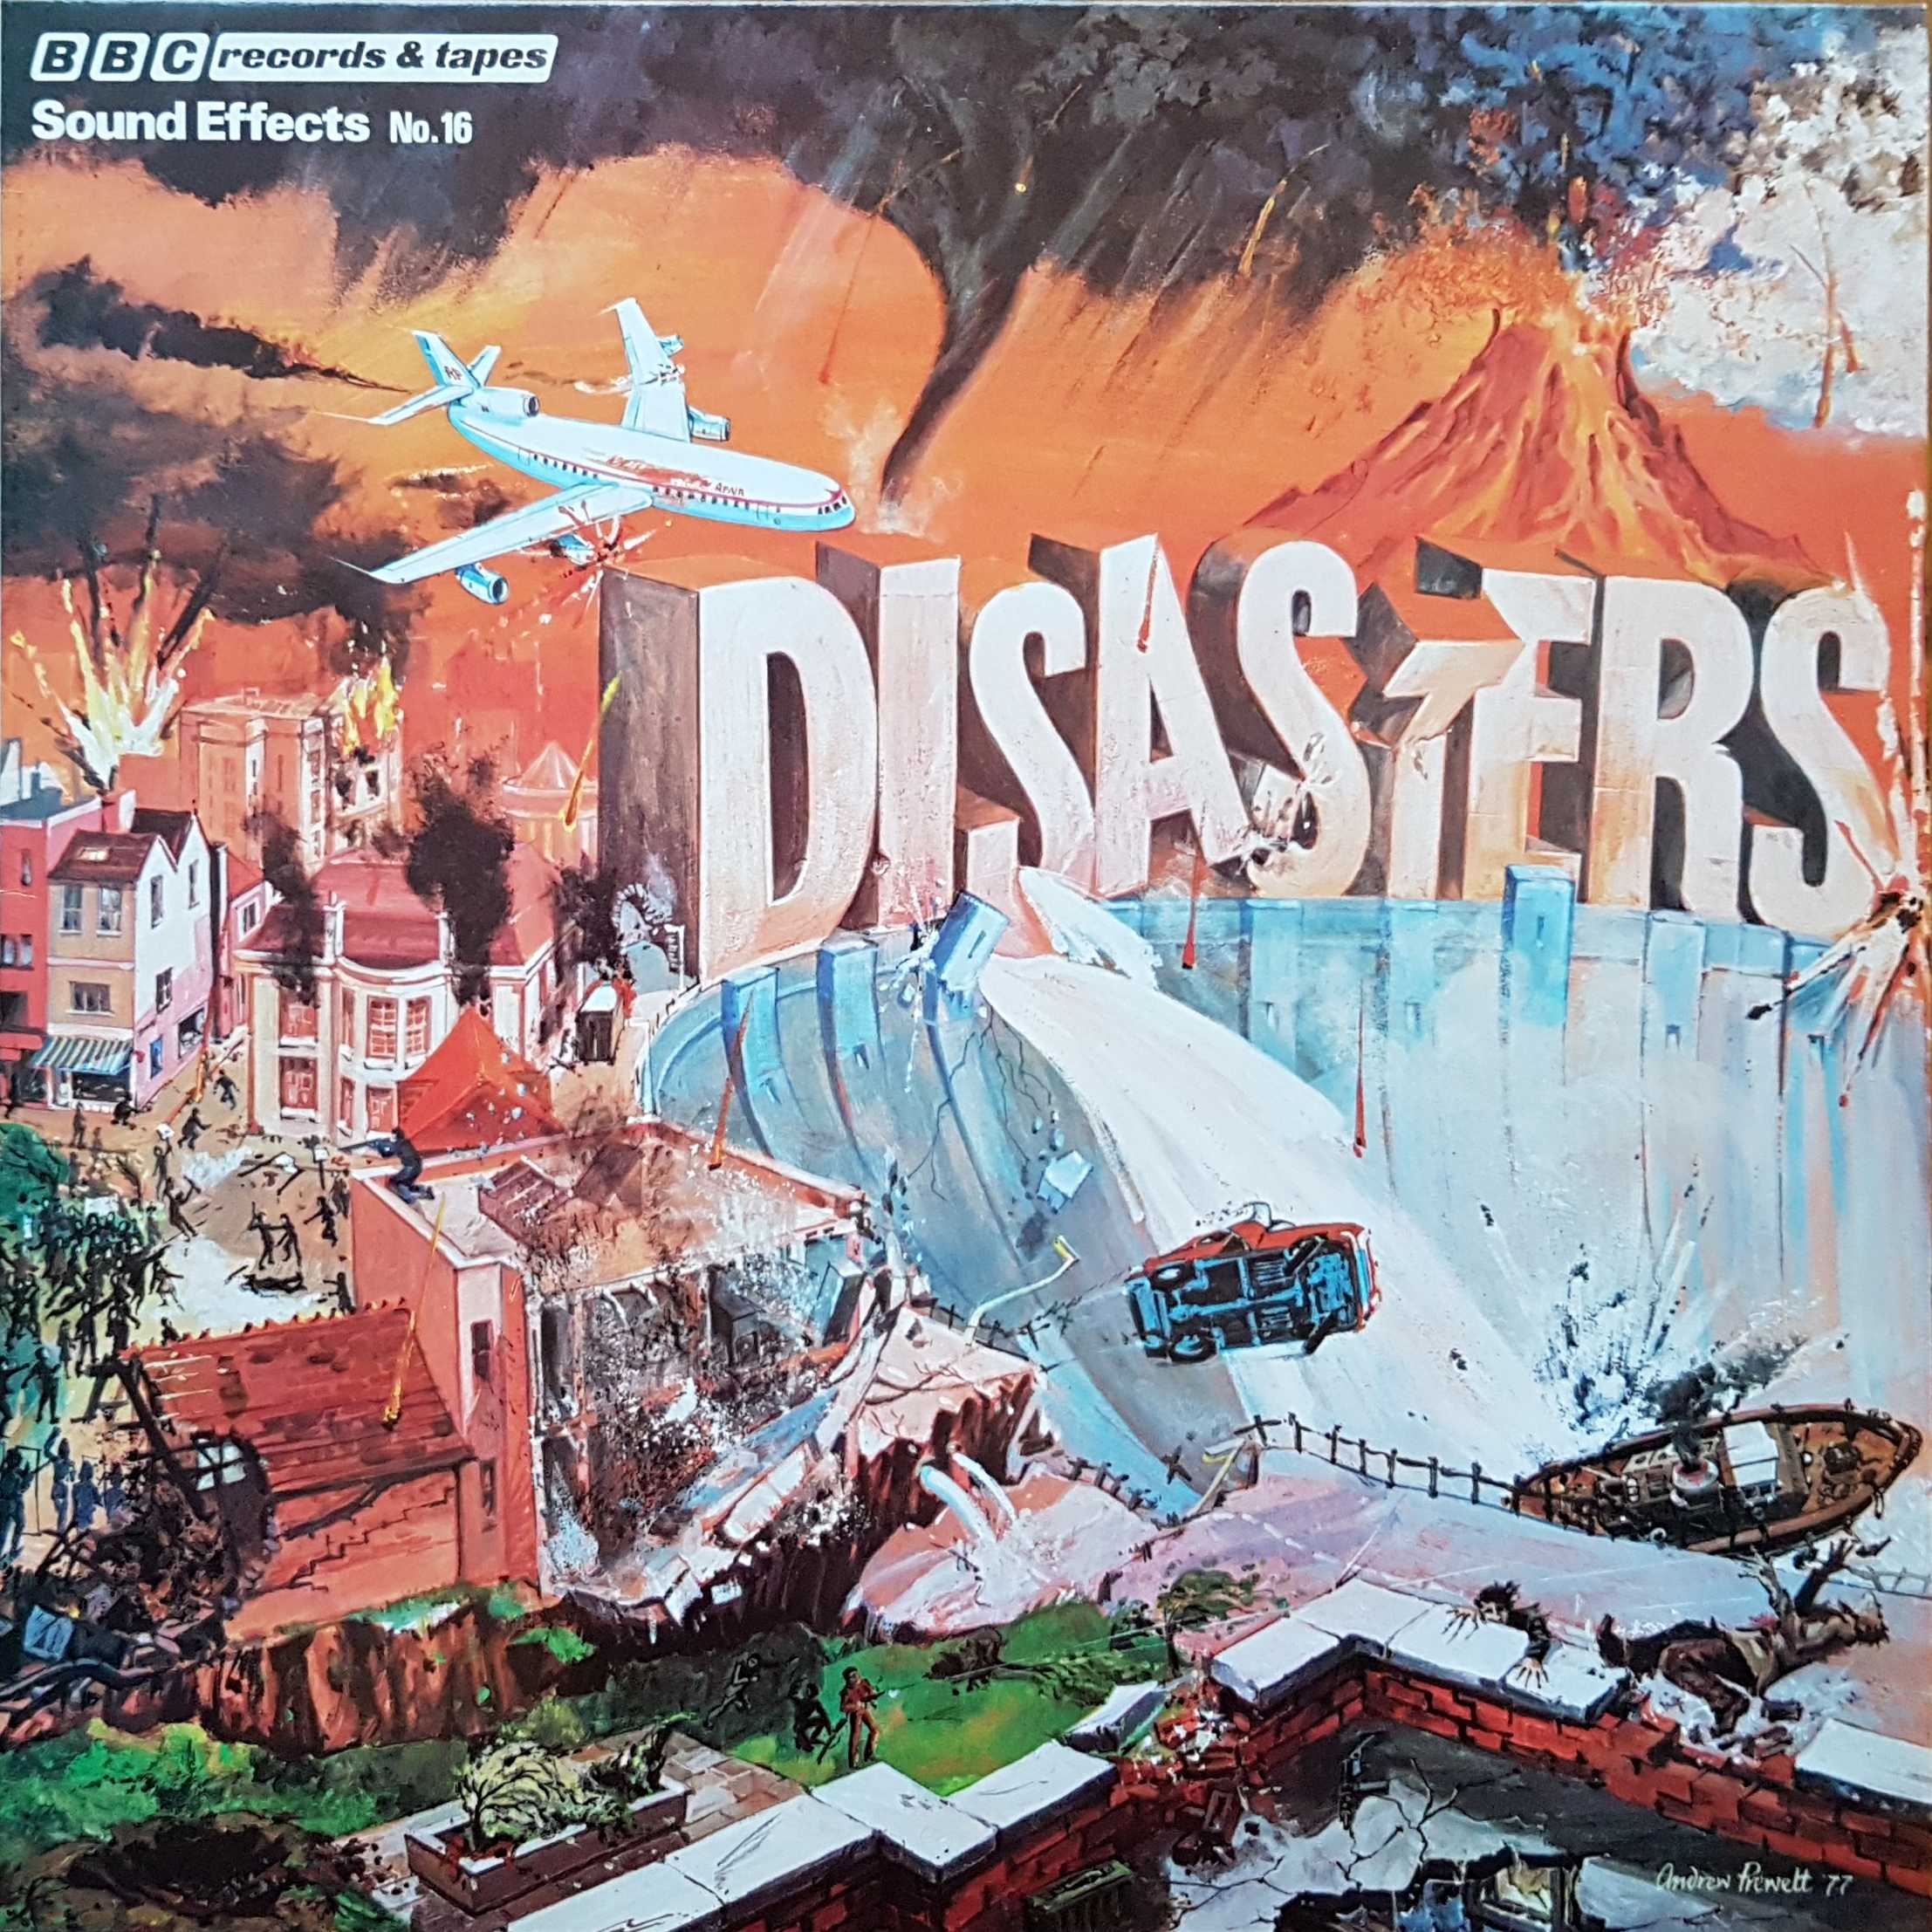 Picture of REC 295 Disasters by artist Various from the BBC albums - Records and Tapes library